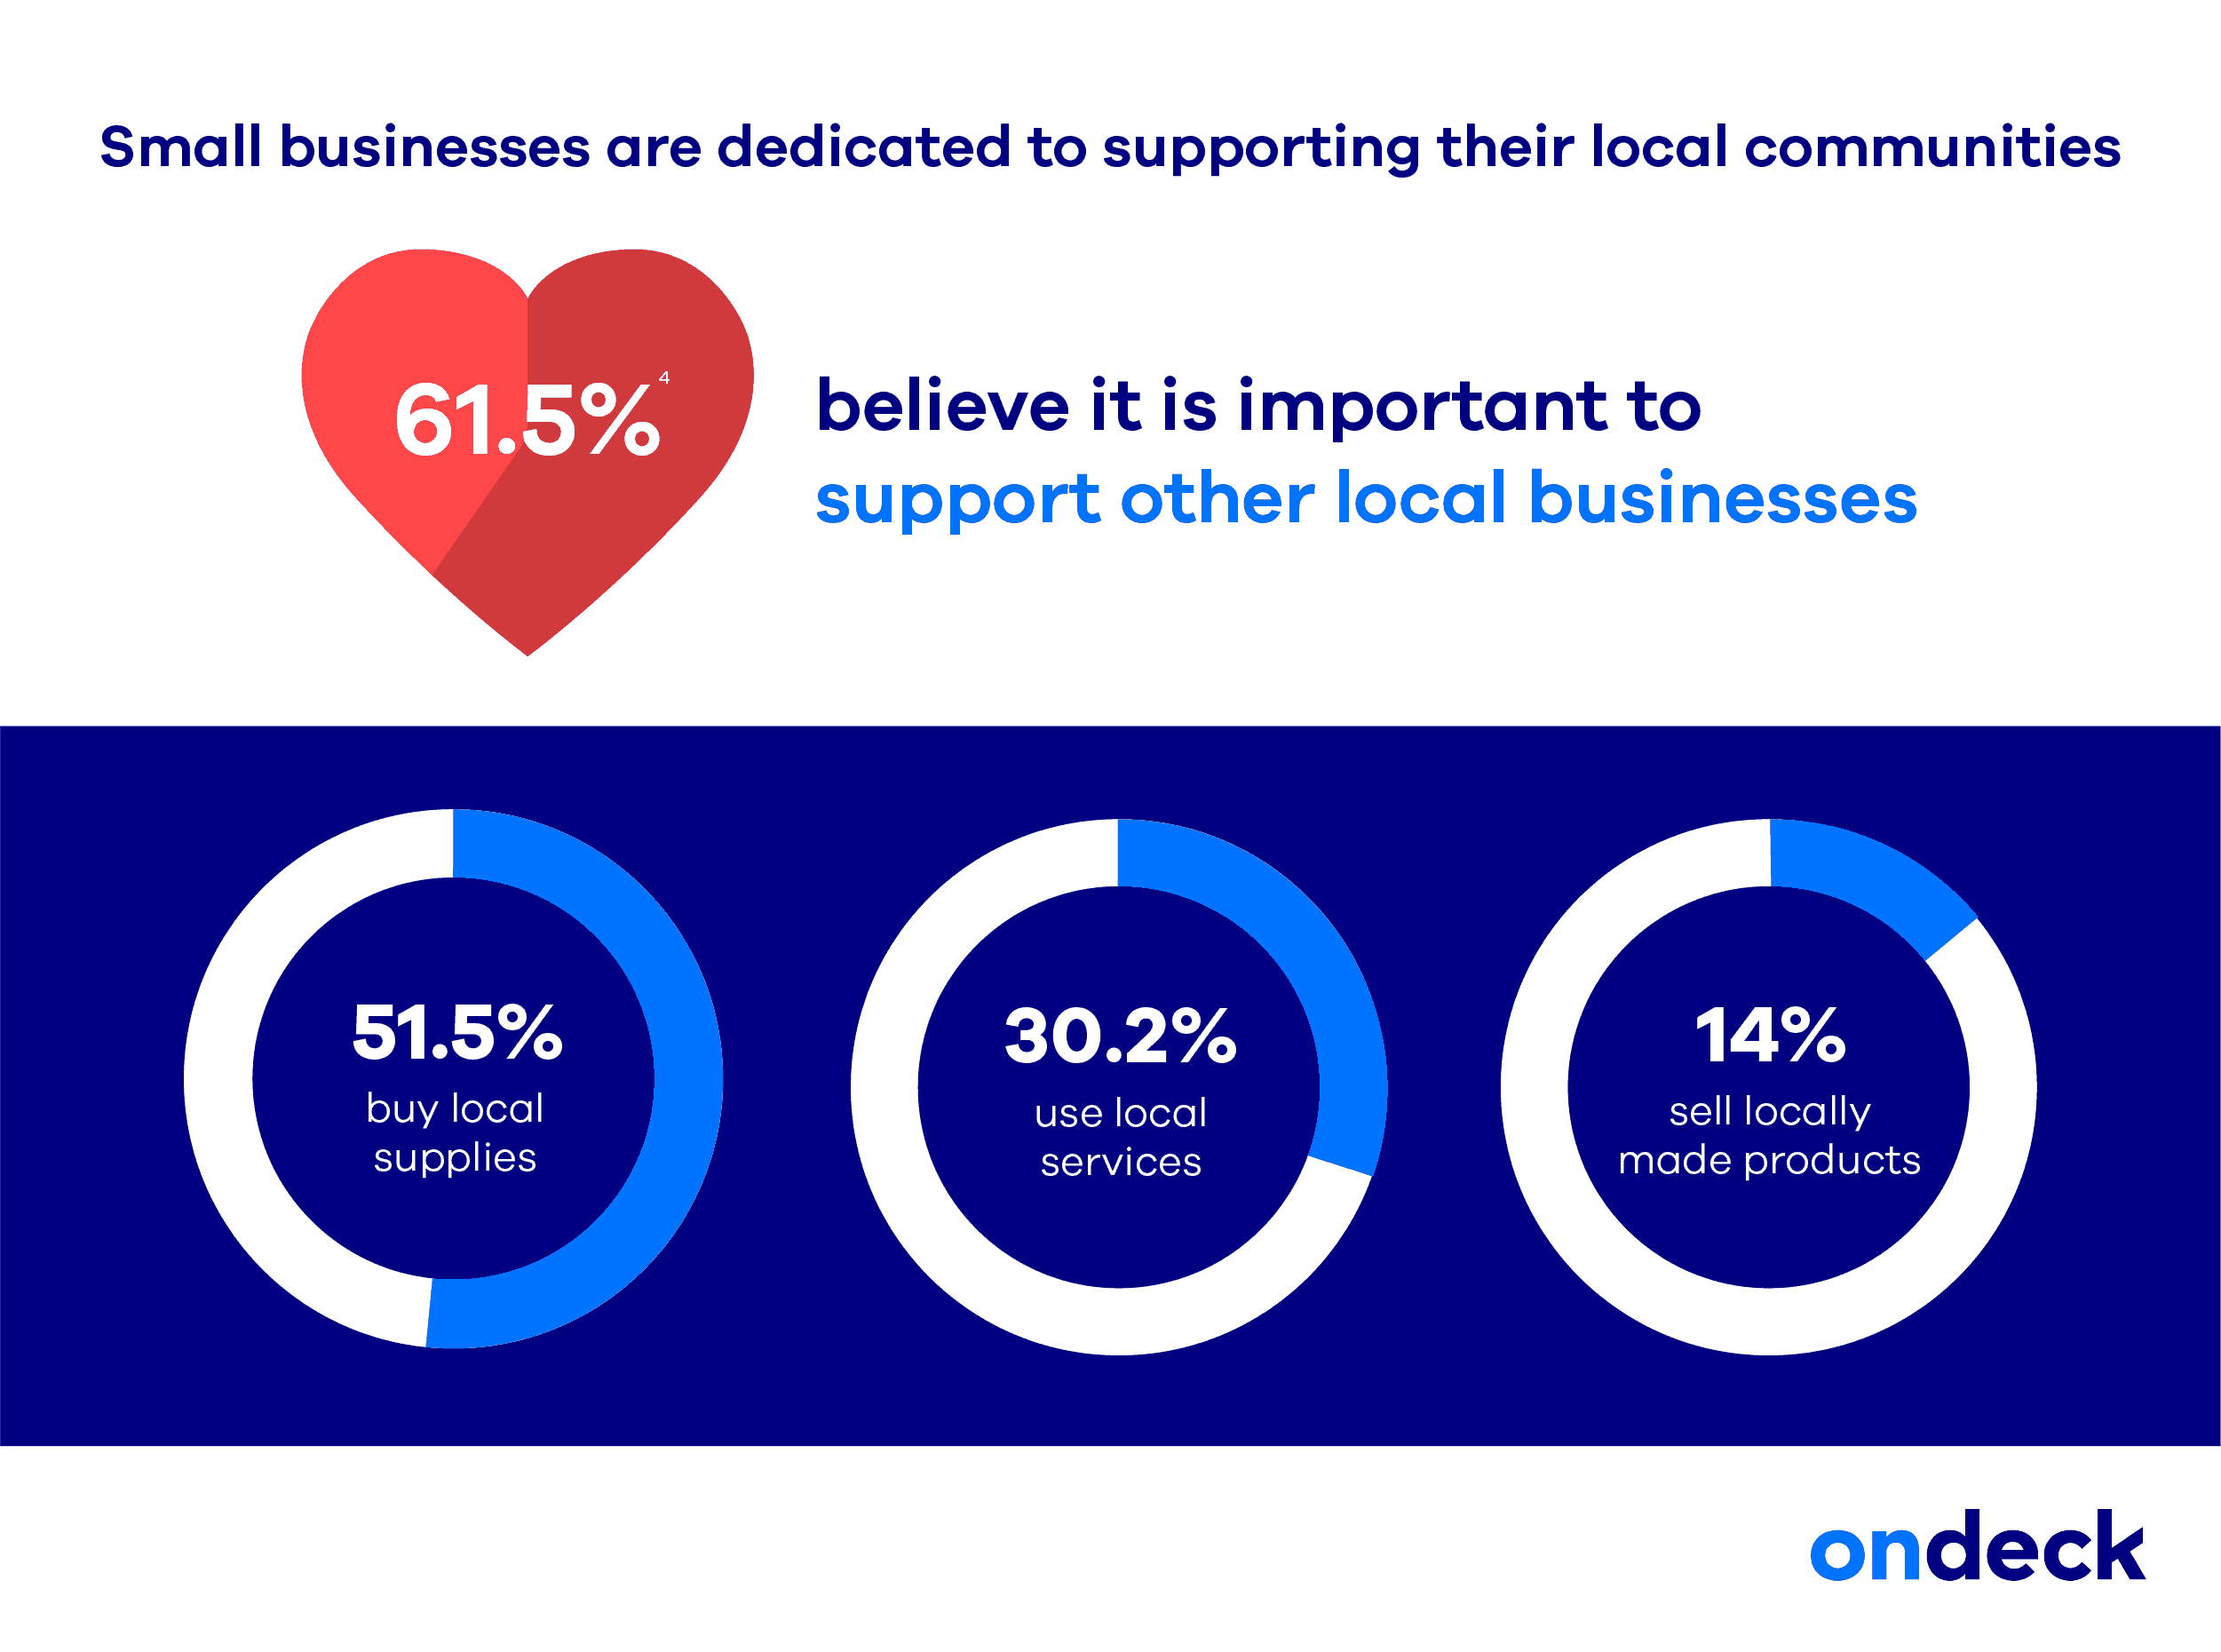 ondeck second annual small business community impact survey